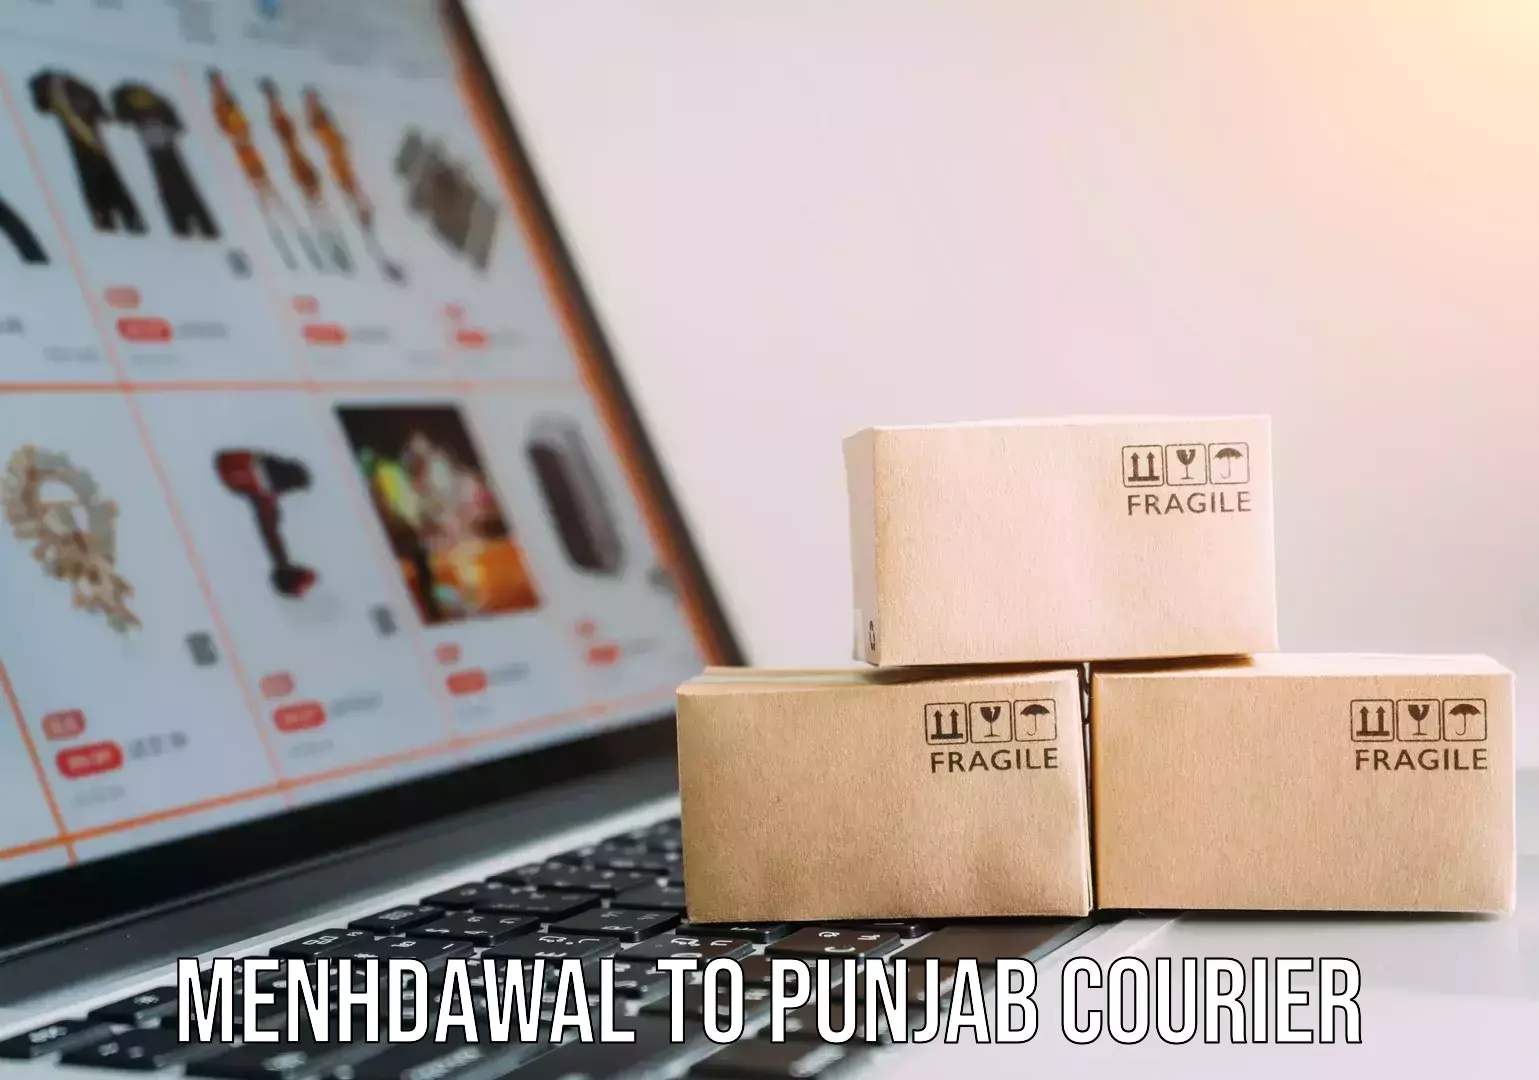 Home moving specialists Menhdawal to Punjab